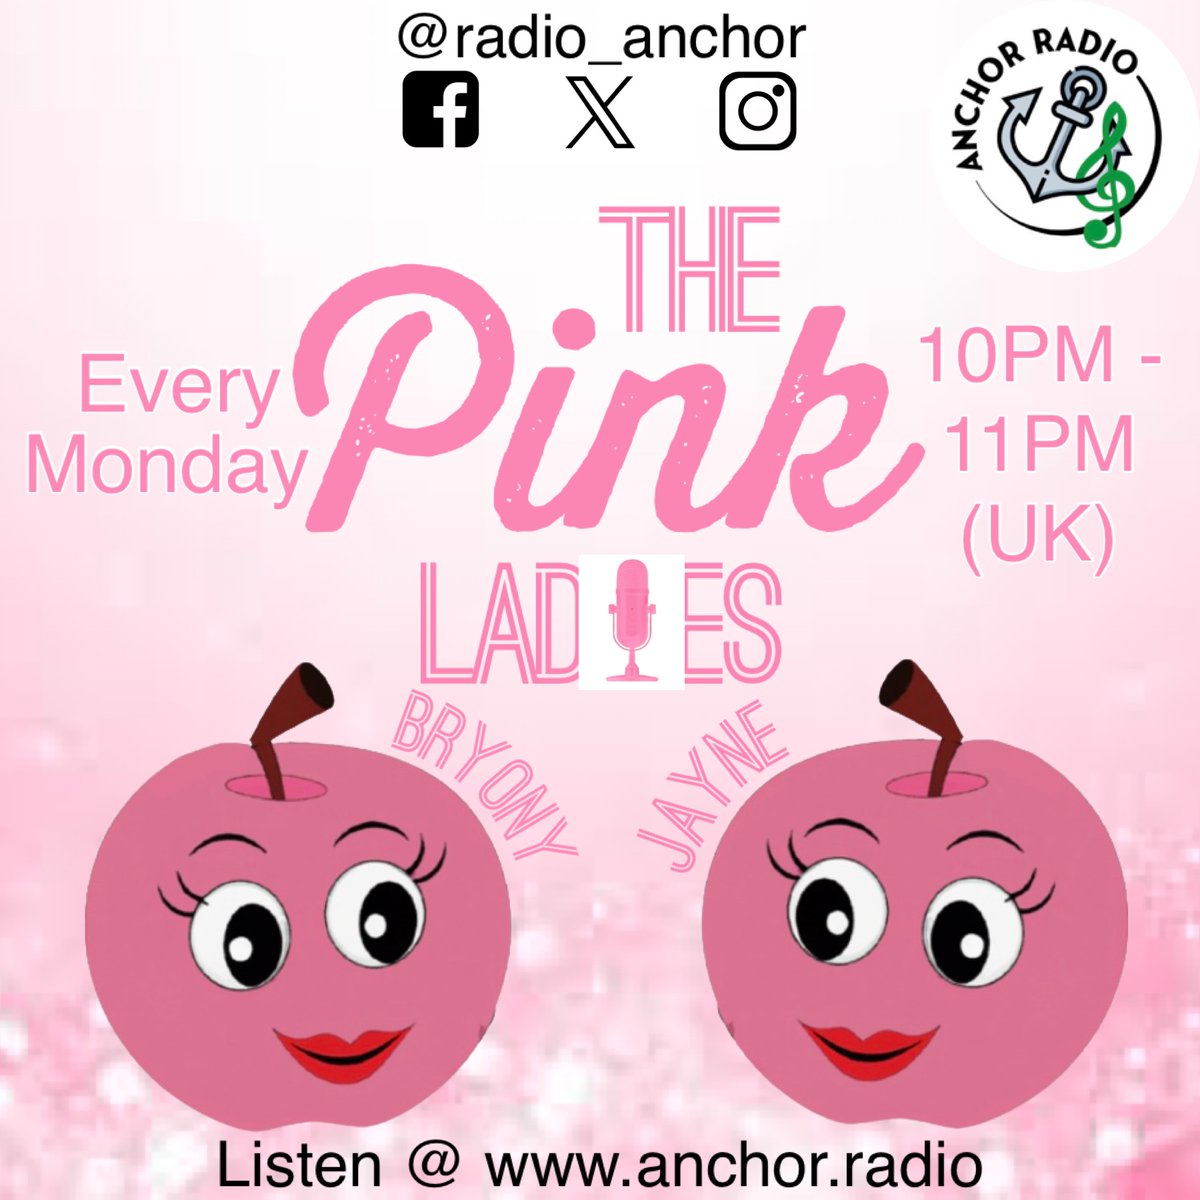 At 10pm it’s one pink lady with music to find out which one, tune in at anchor.radio